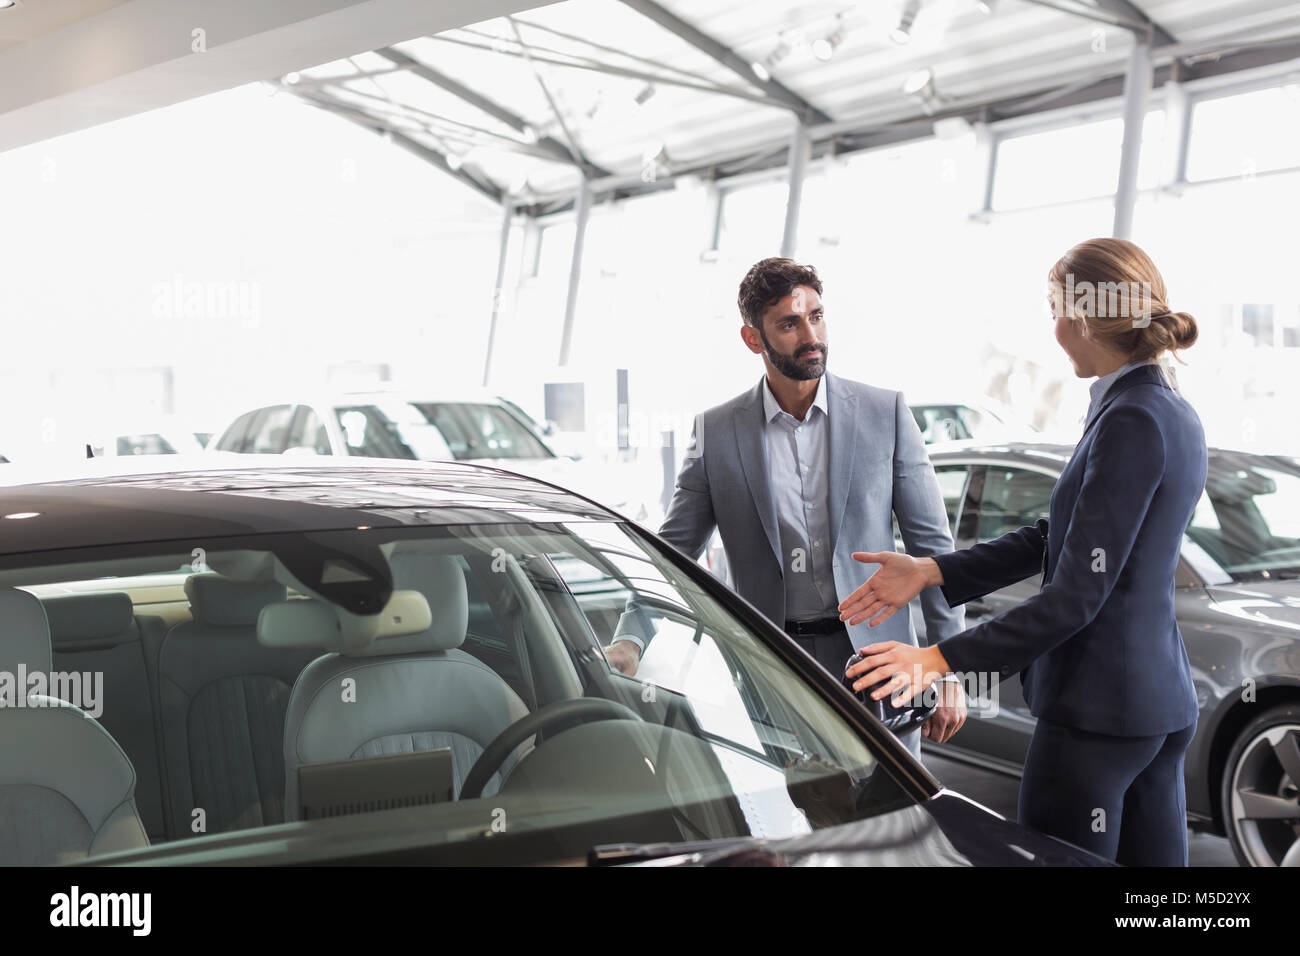 Car saleswoman showing new car to male customer in car dealership showroom Stock Photo